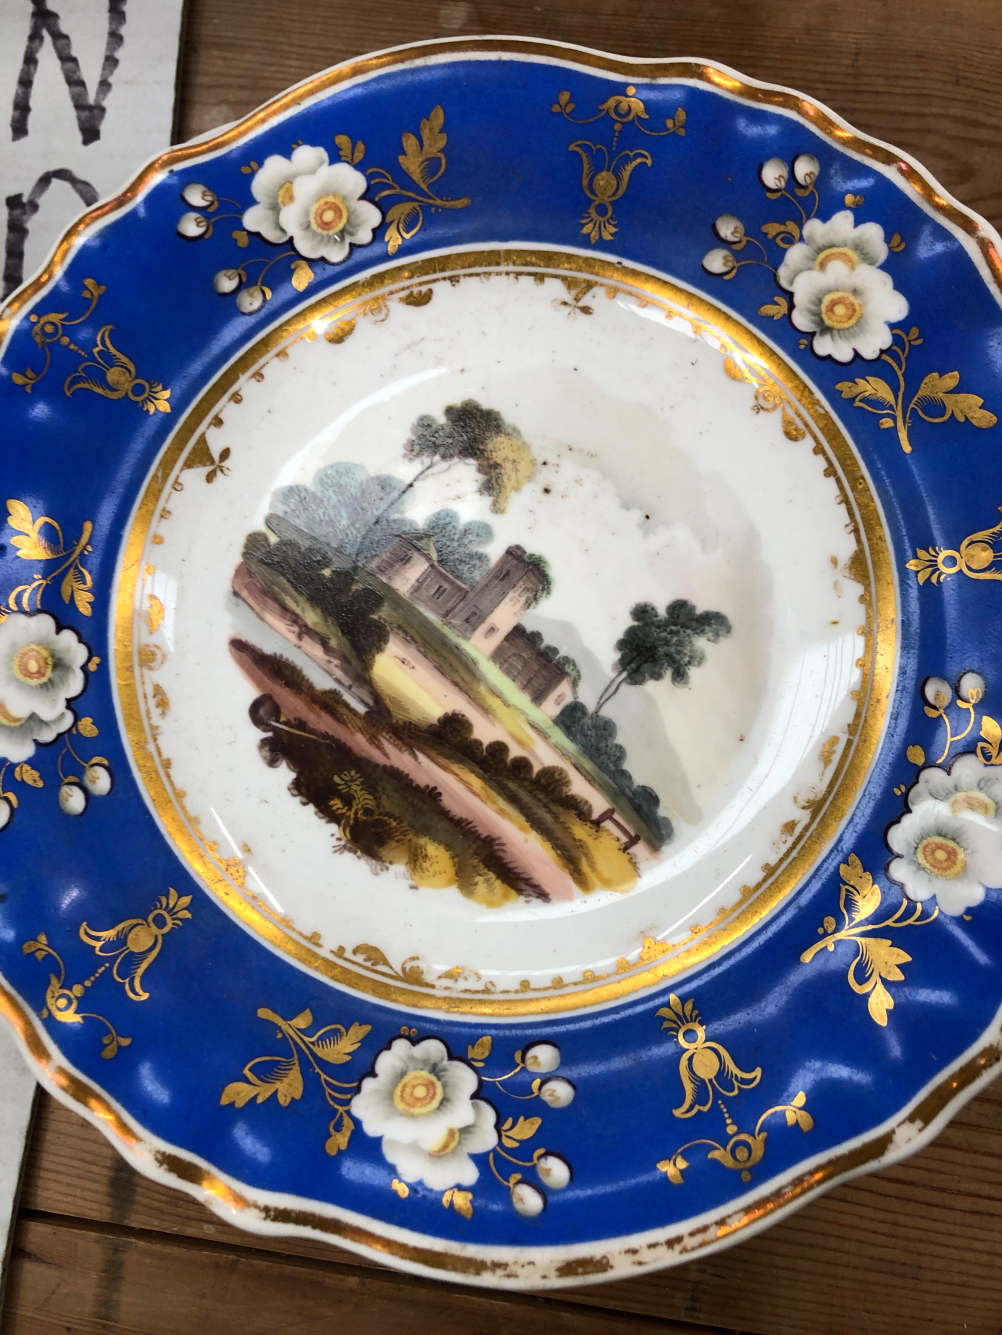 A 19th C. ENGLISH PORCELAIN DESSERT SERVICE PAINTED WITH LANDSCAPES WITHIN GILT BLUE BANDS - Image 13 of 27